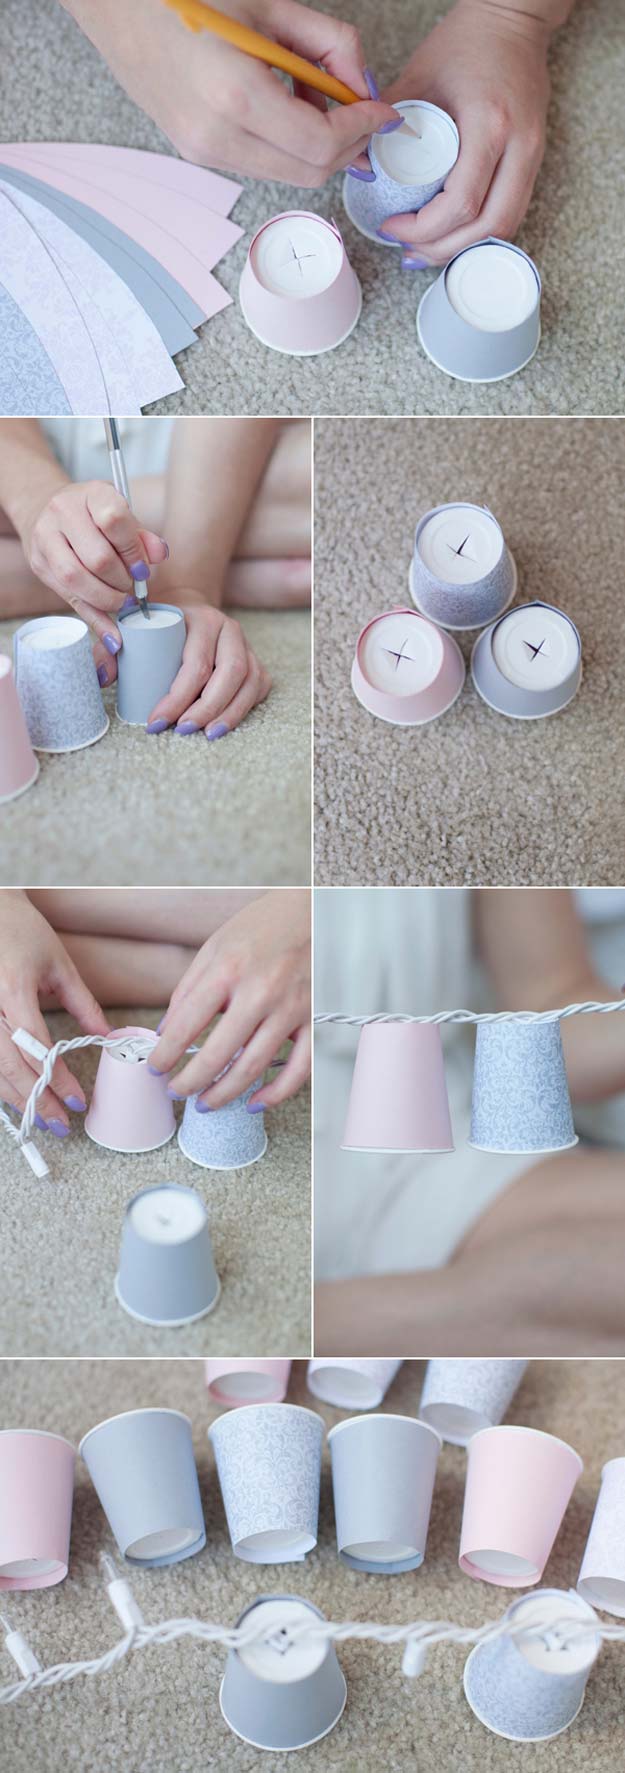 DIY Dorm Room Decor Ideas - Dixie Cup Garland - Cheap DIY Dorm Decor Projects for College Rooms - Cool Crafts, Wall Art, Easy Organization for Girls - Fun DYI Tutorials for Teens and College Students #diyideas #roomdecor #diy #collegelife #teencrafts